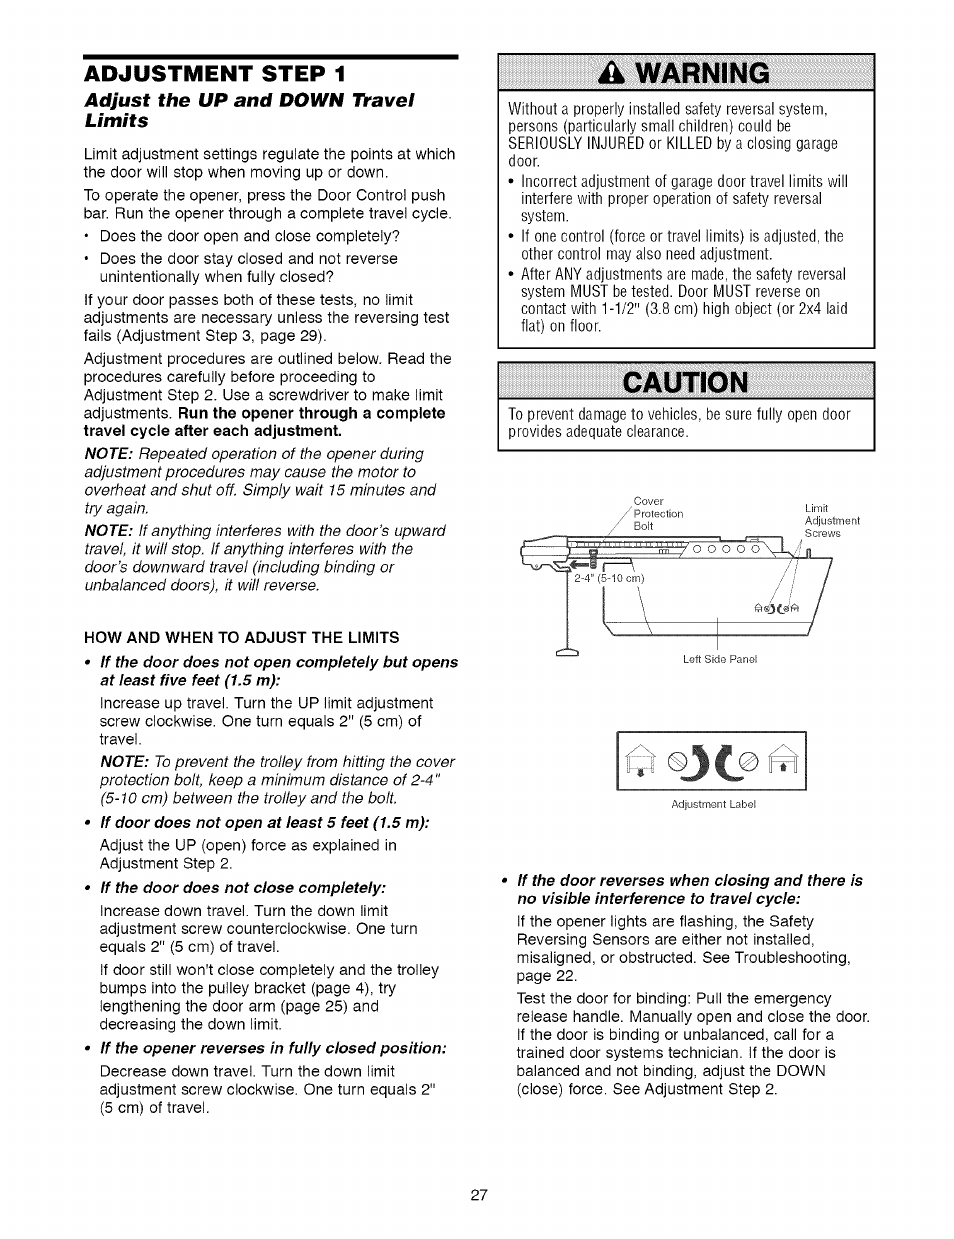 Adjustment step 1, Adjust the up and down travel limits, How and when to adjust the limits | Warning, Caution | Craftsman 1/2 HP GARAGE DOOR OPENER MODEL 139.5364812 User Manual | Page 27 / 40